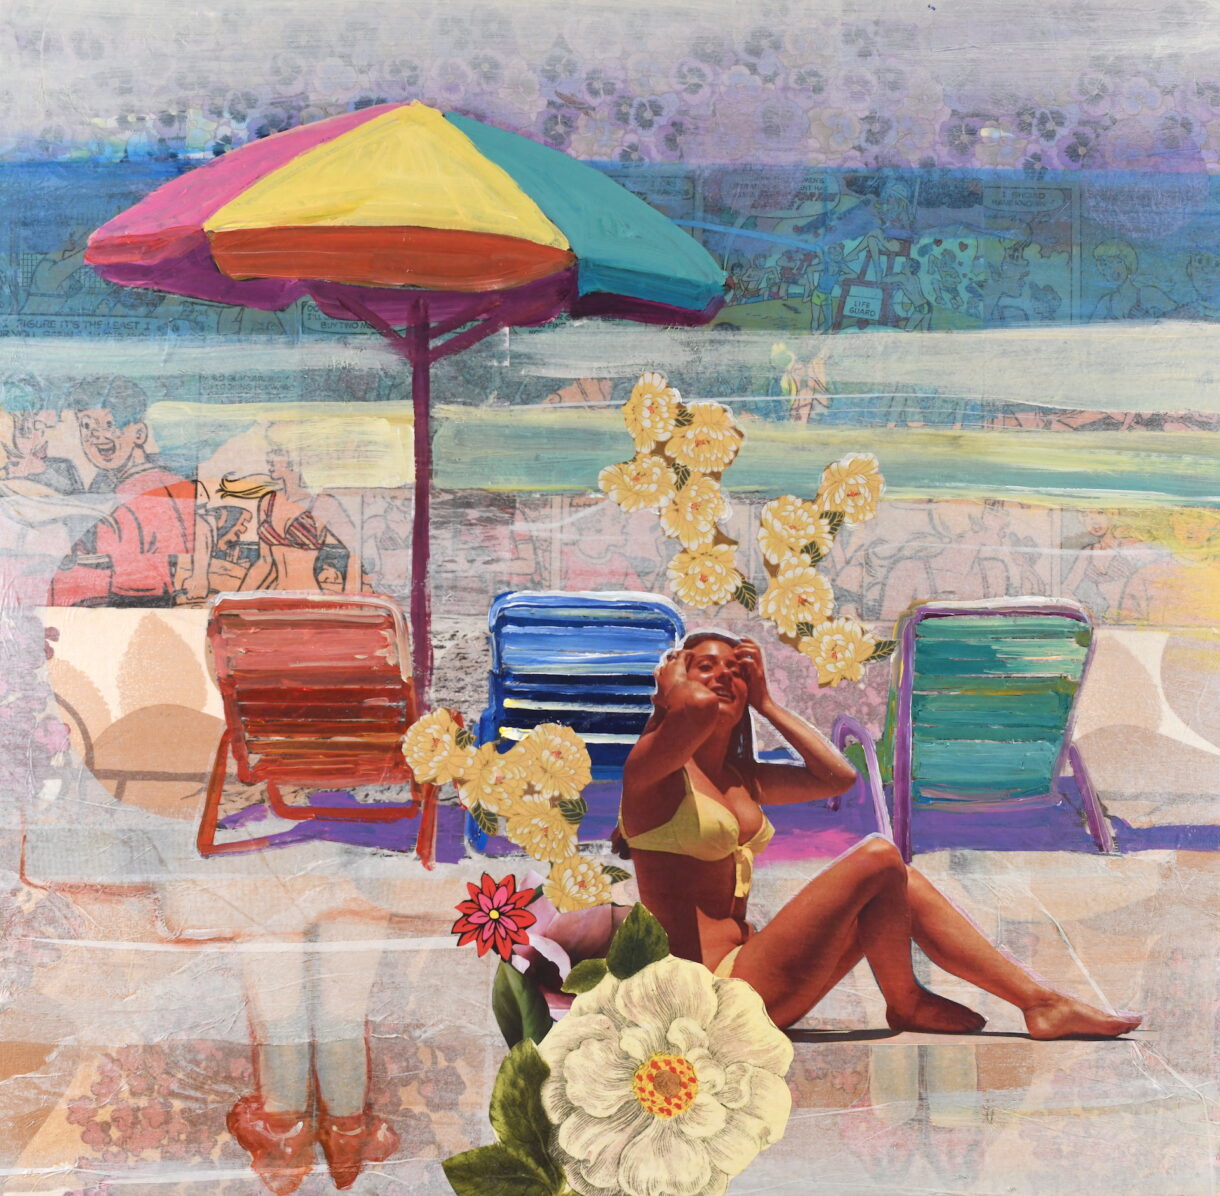 a beach with a woman in the sun with umbrellas searching for her creative self